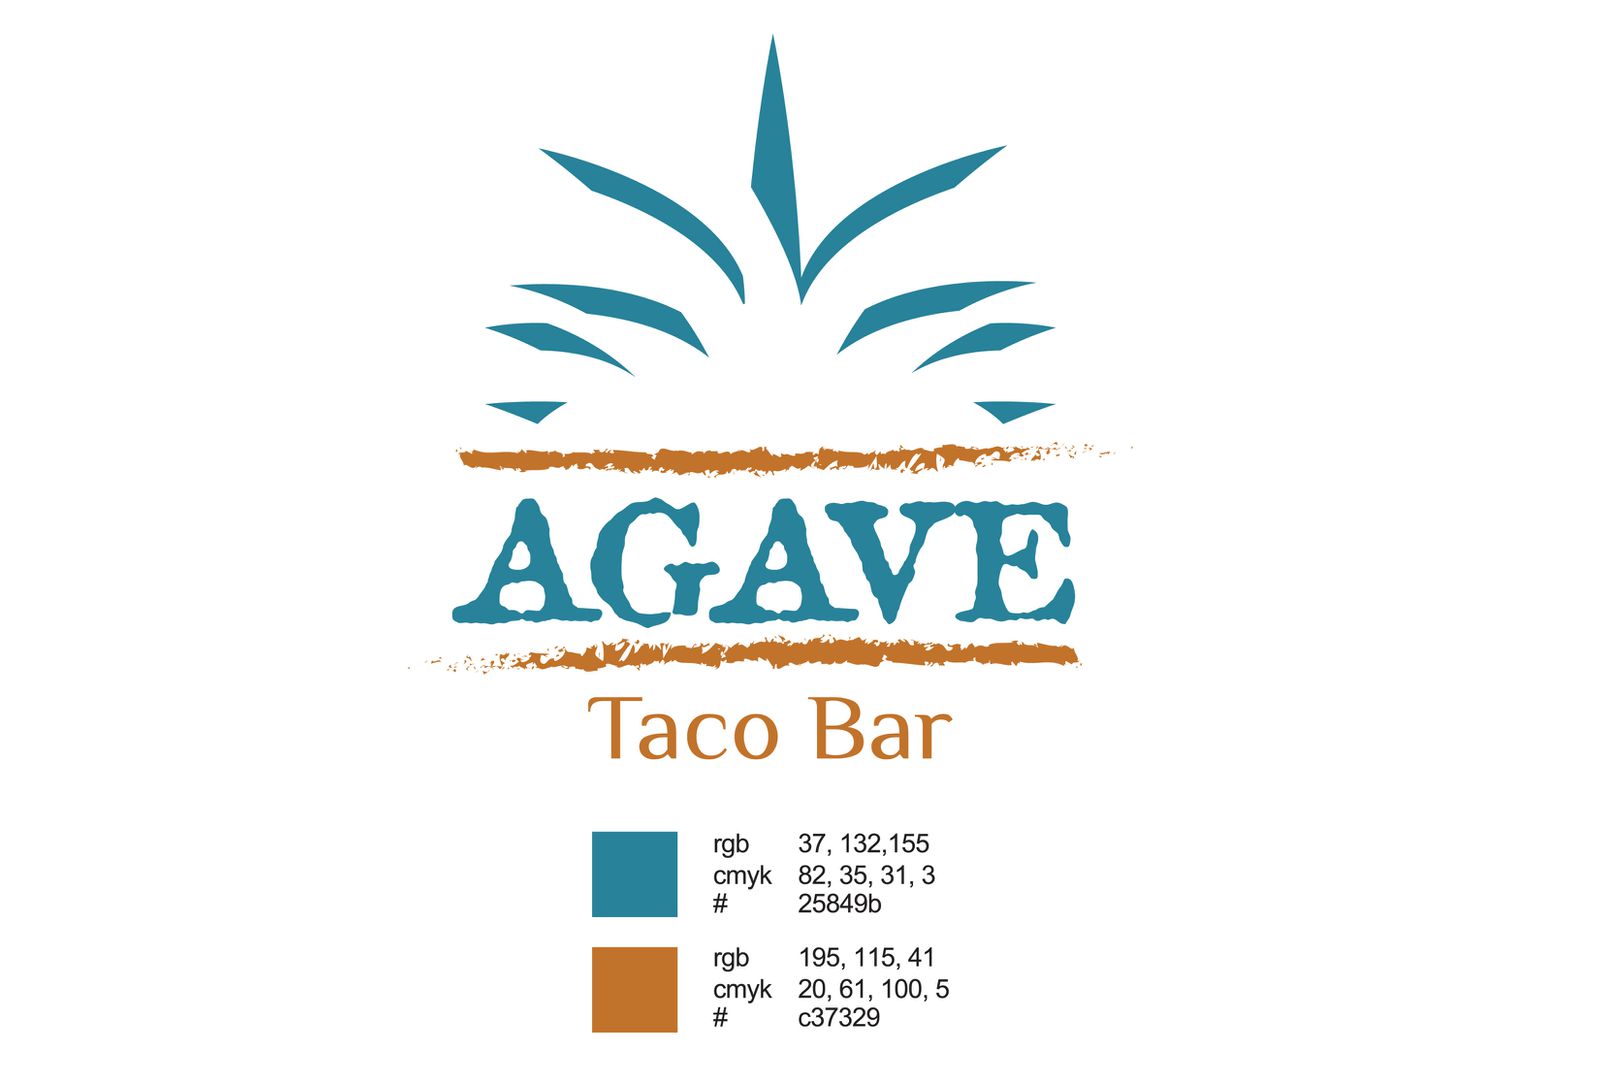 Agave final logo specifications